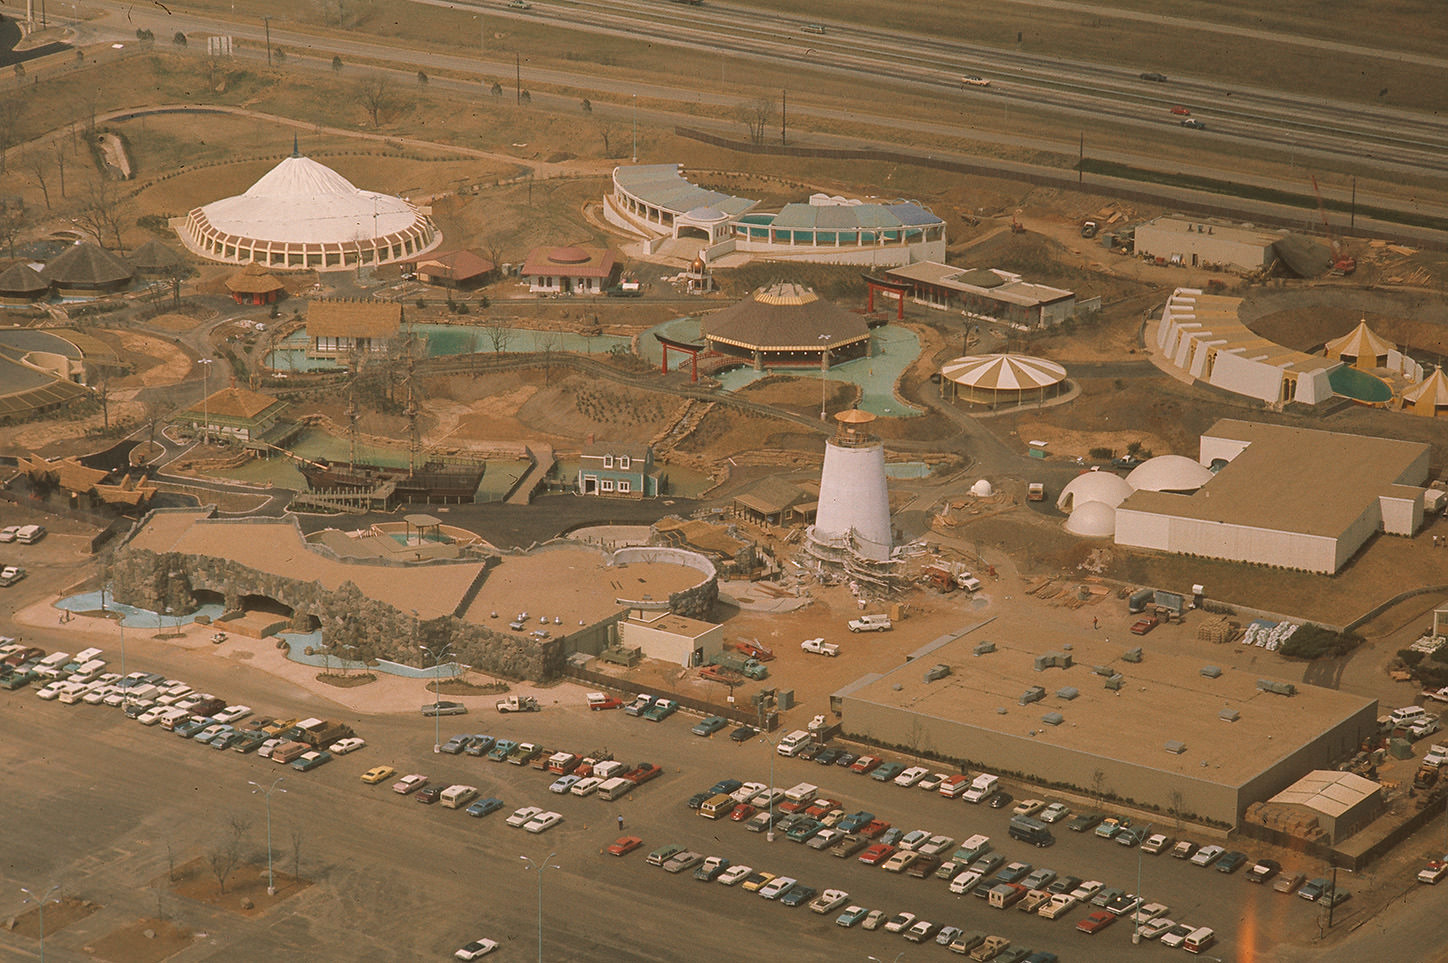 Aerial view during construction of Seven Seas Marine Life Park in Arlington, Texas, 1972